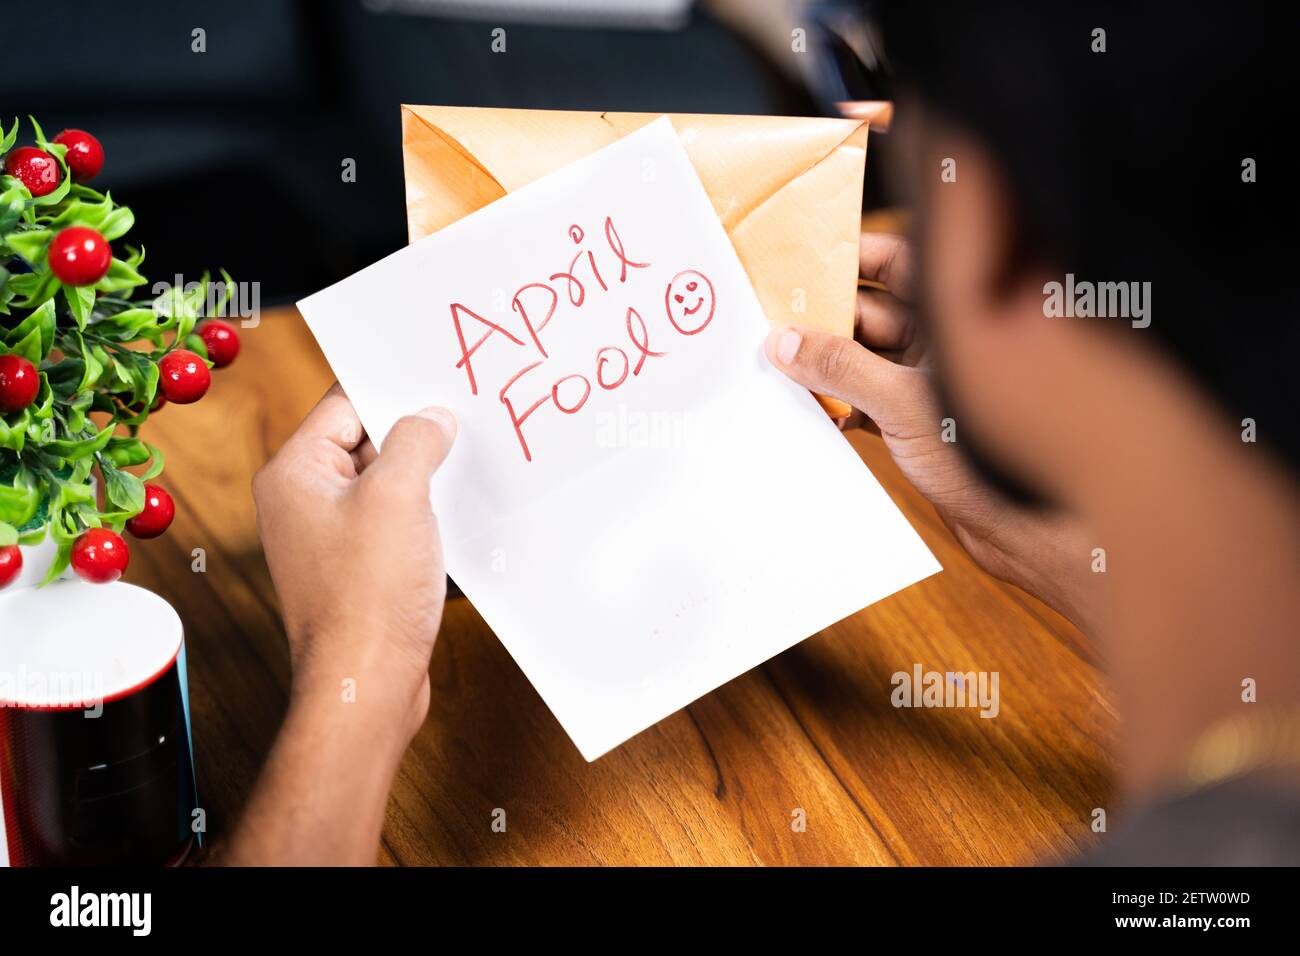 Shoulder shot of young man receiving prank latter - Concept of April fools day prank showing by sending surprise letter, after opening mentioned april Stock Photo